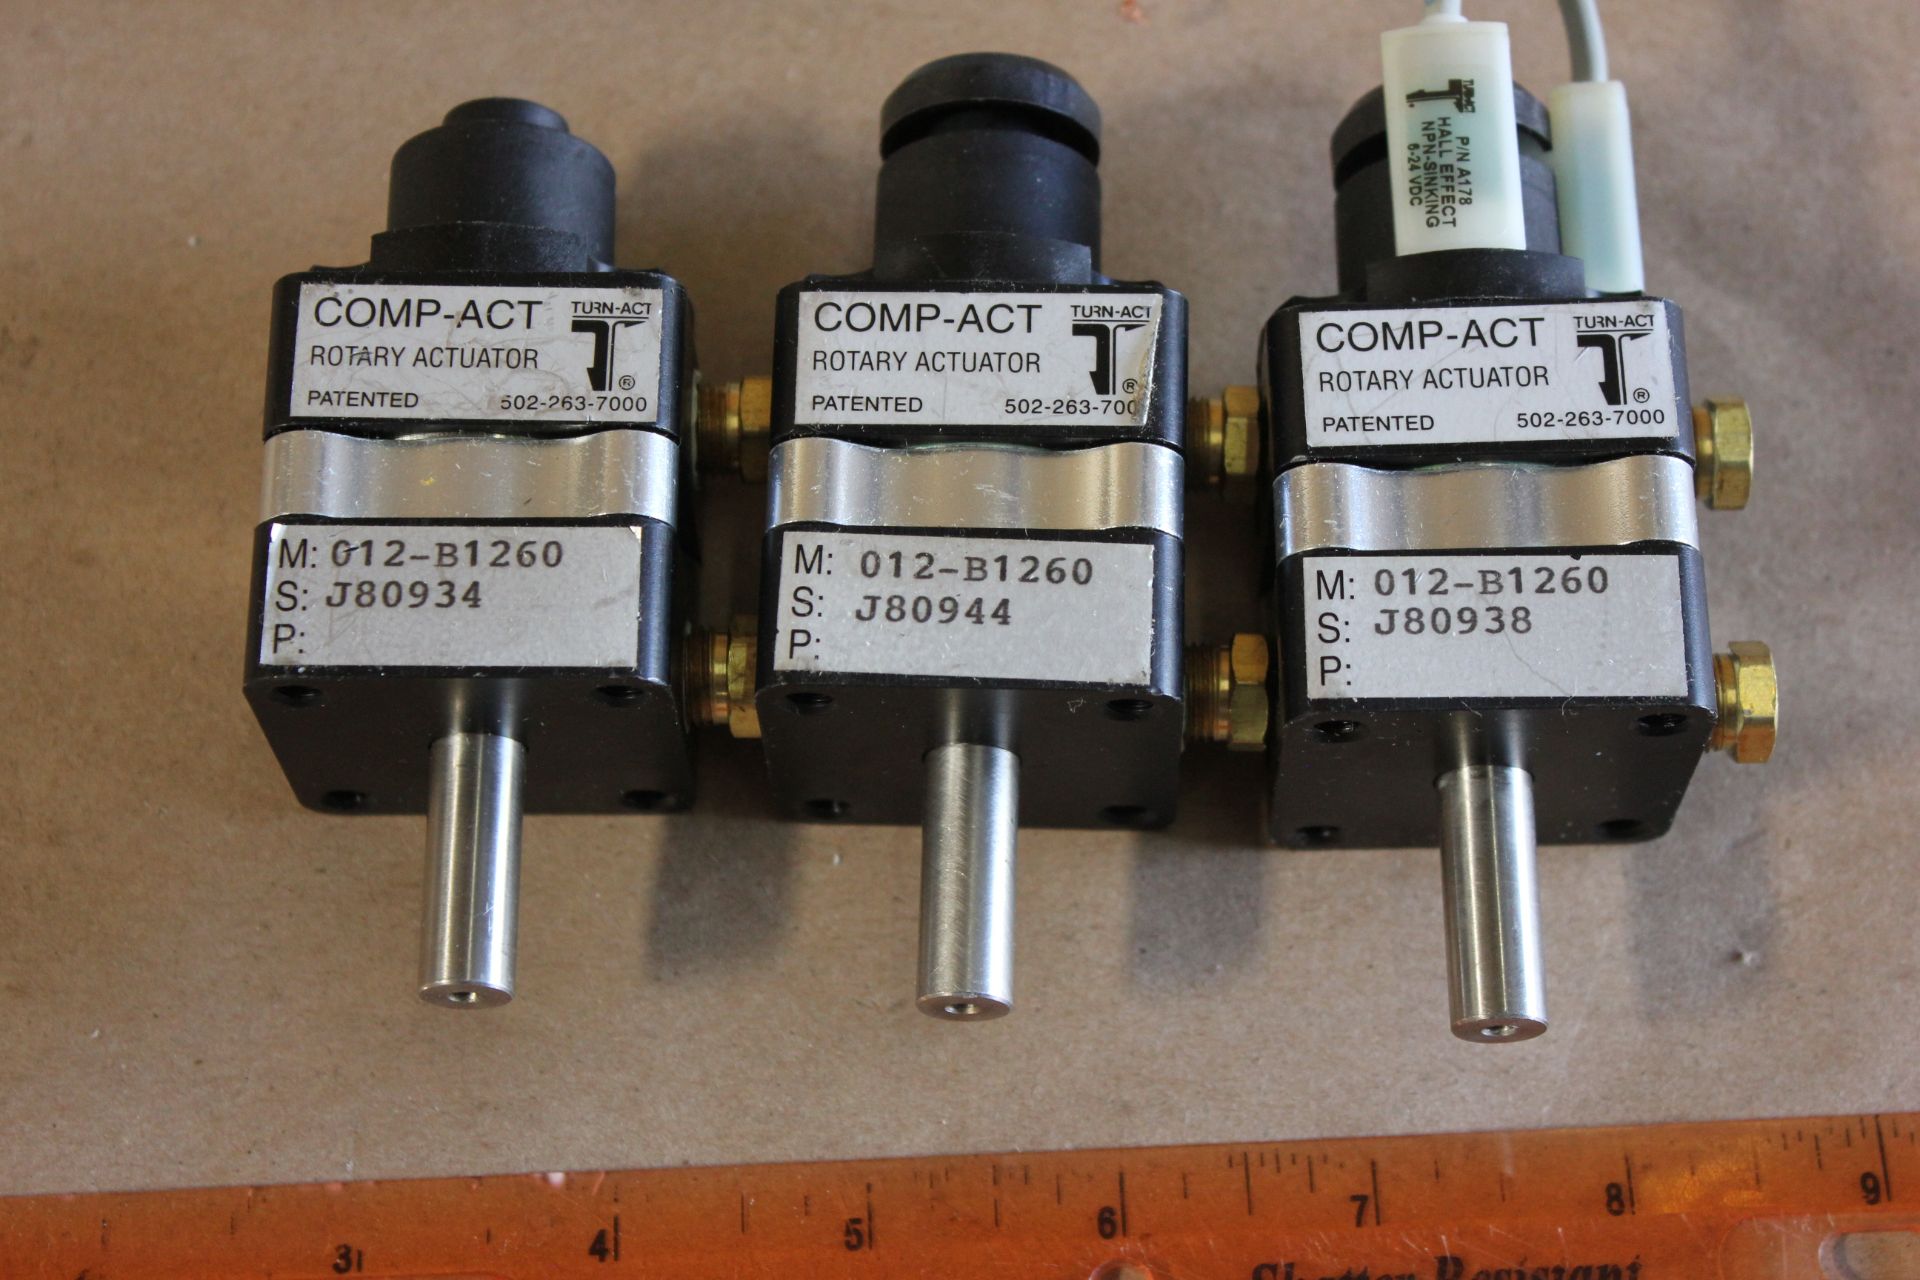 LOT OF COMP-ACT ROTARY ACTUATORS - Image 2 of 4